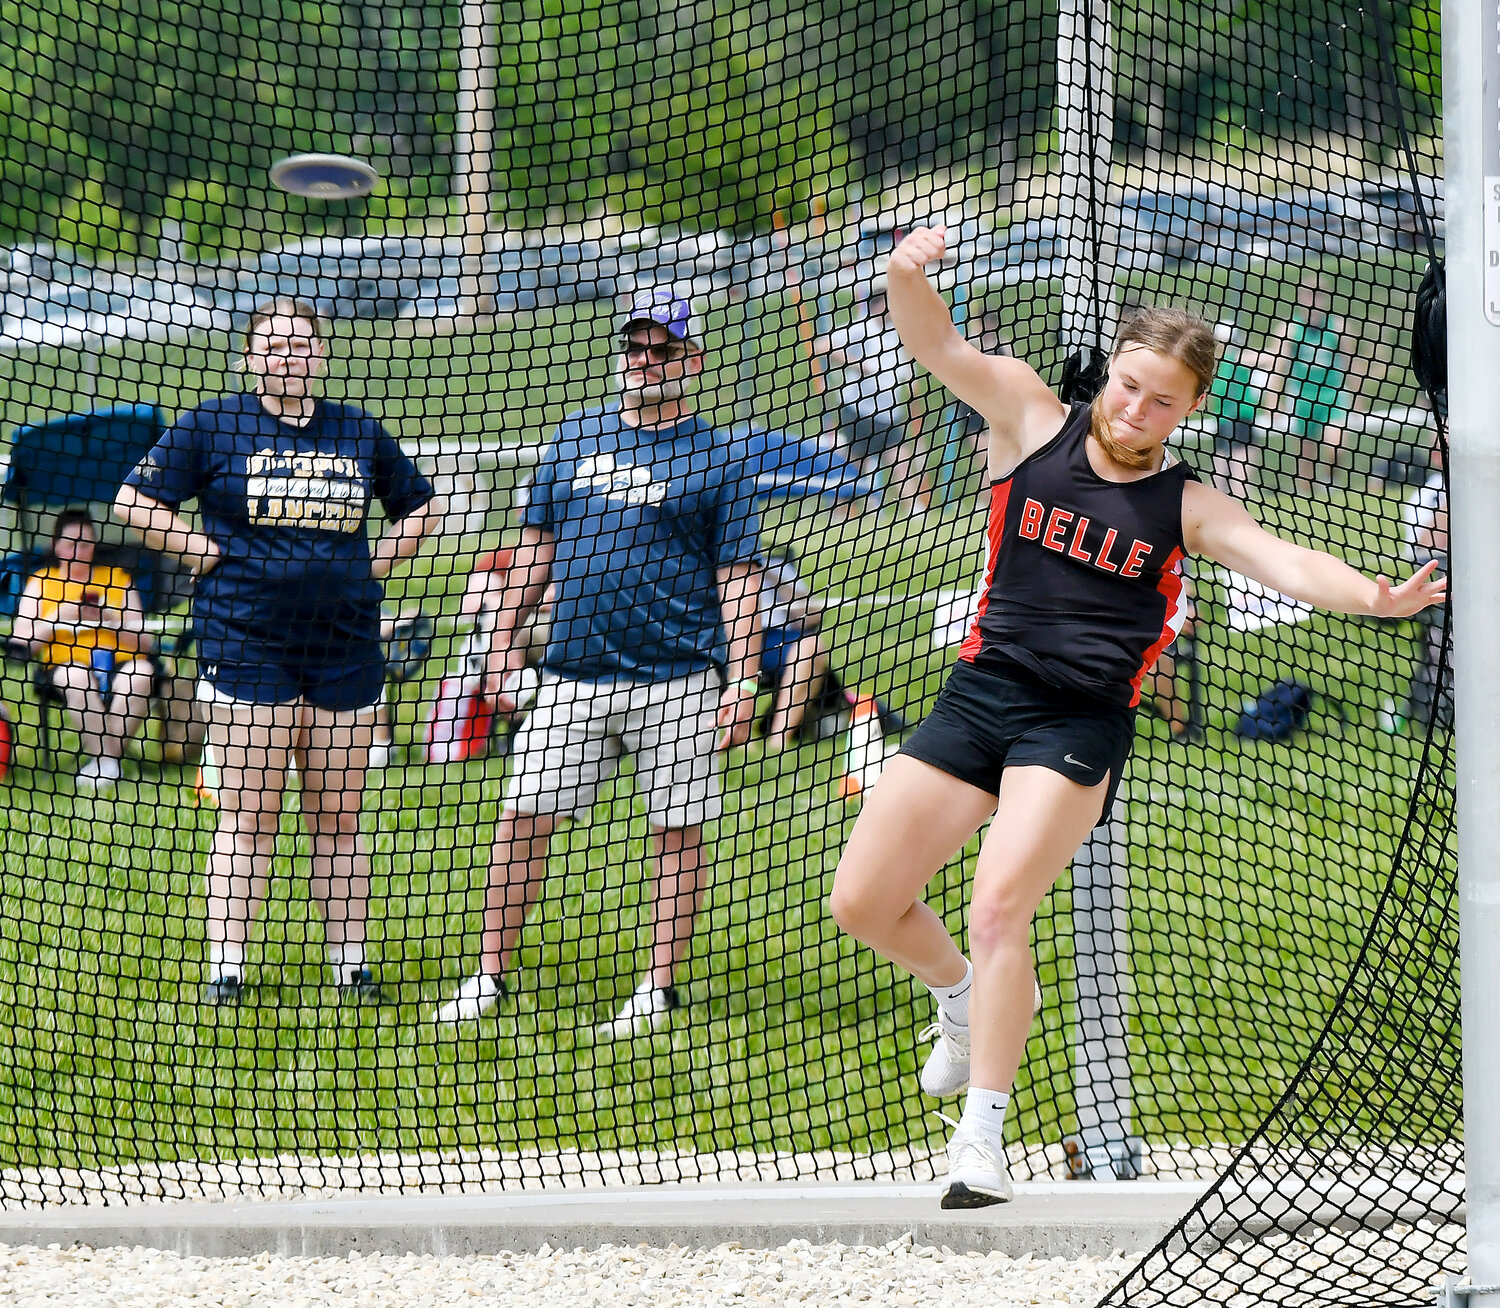 Aubrey Rehmert will be Belle’s lone state track meet qualifier as she placed second in the discus and won the girls javelin during Class 2 girls action.